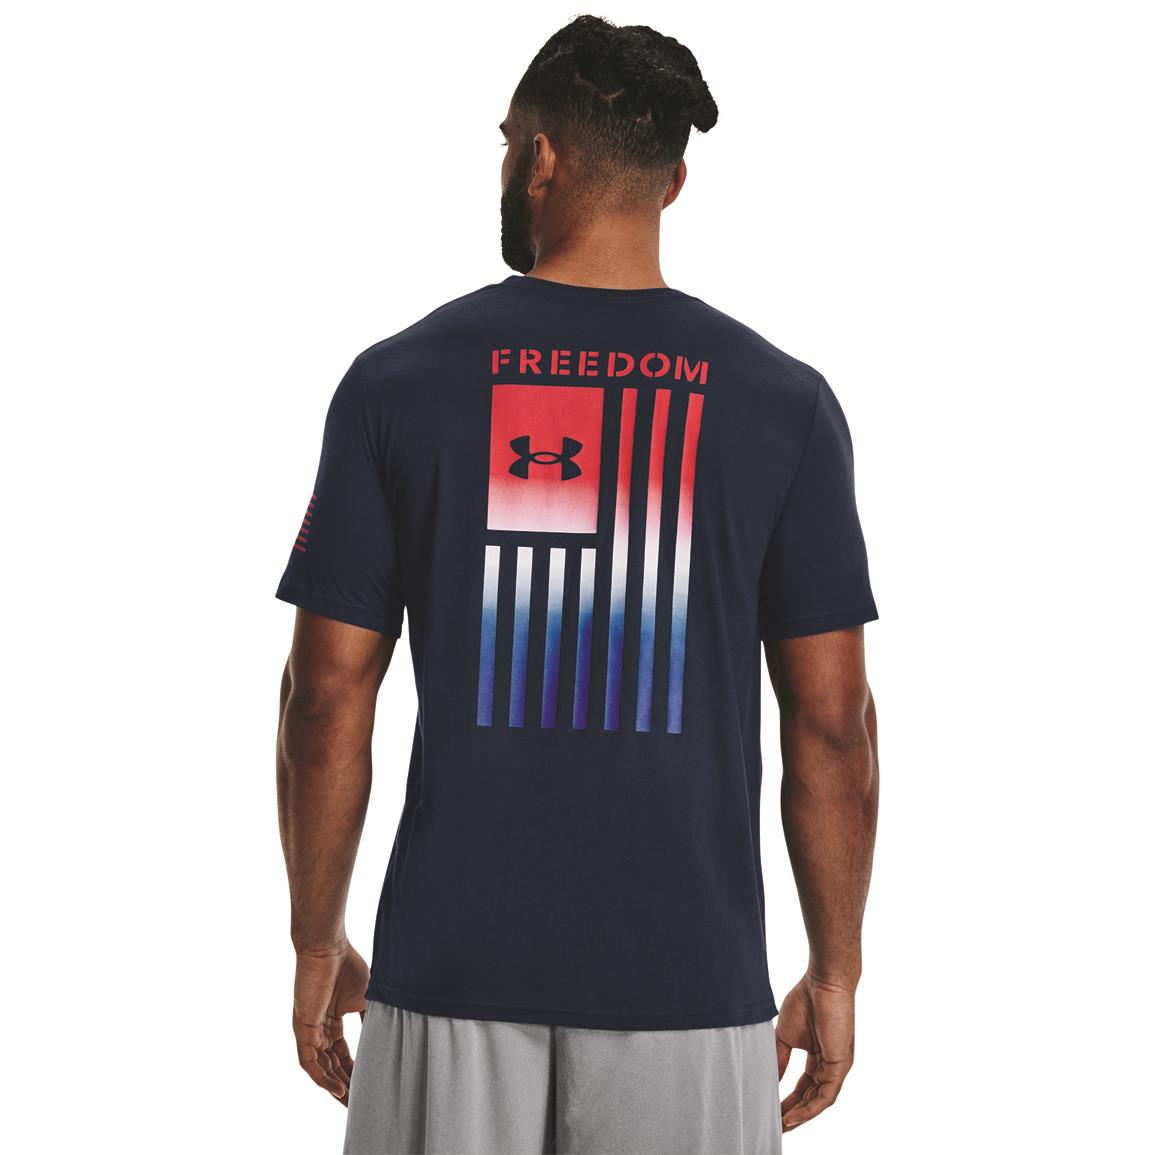 Under Armour Fitted Tshirt | Sportsman's Guide